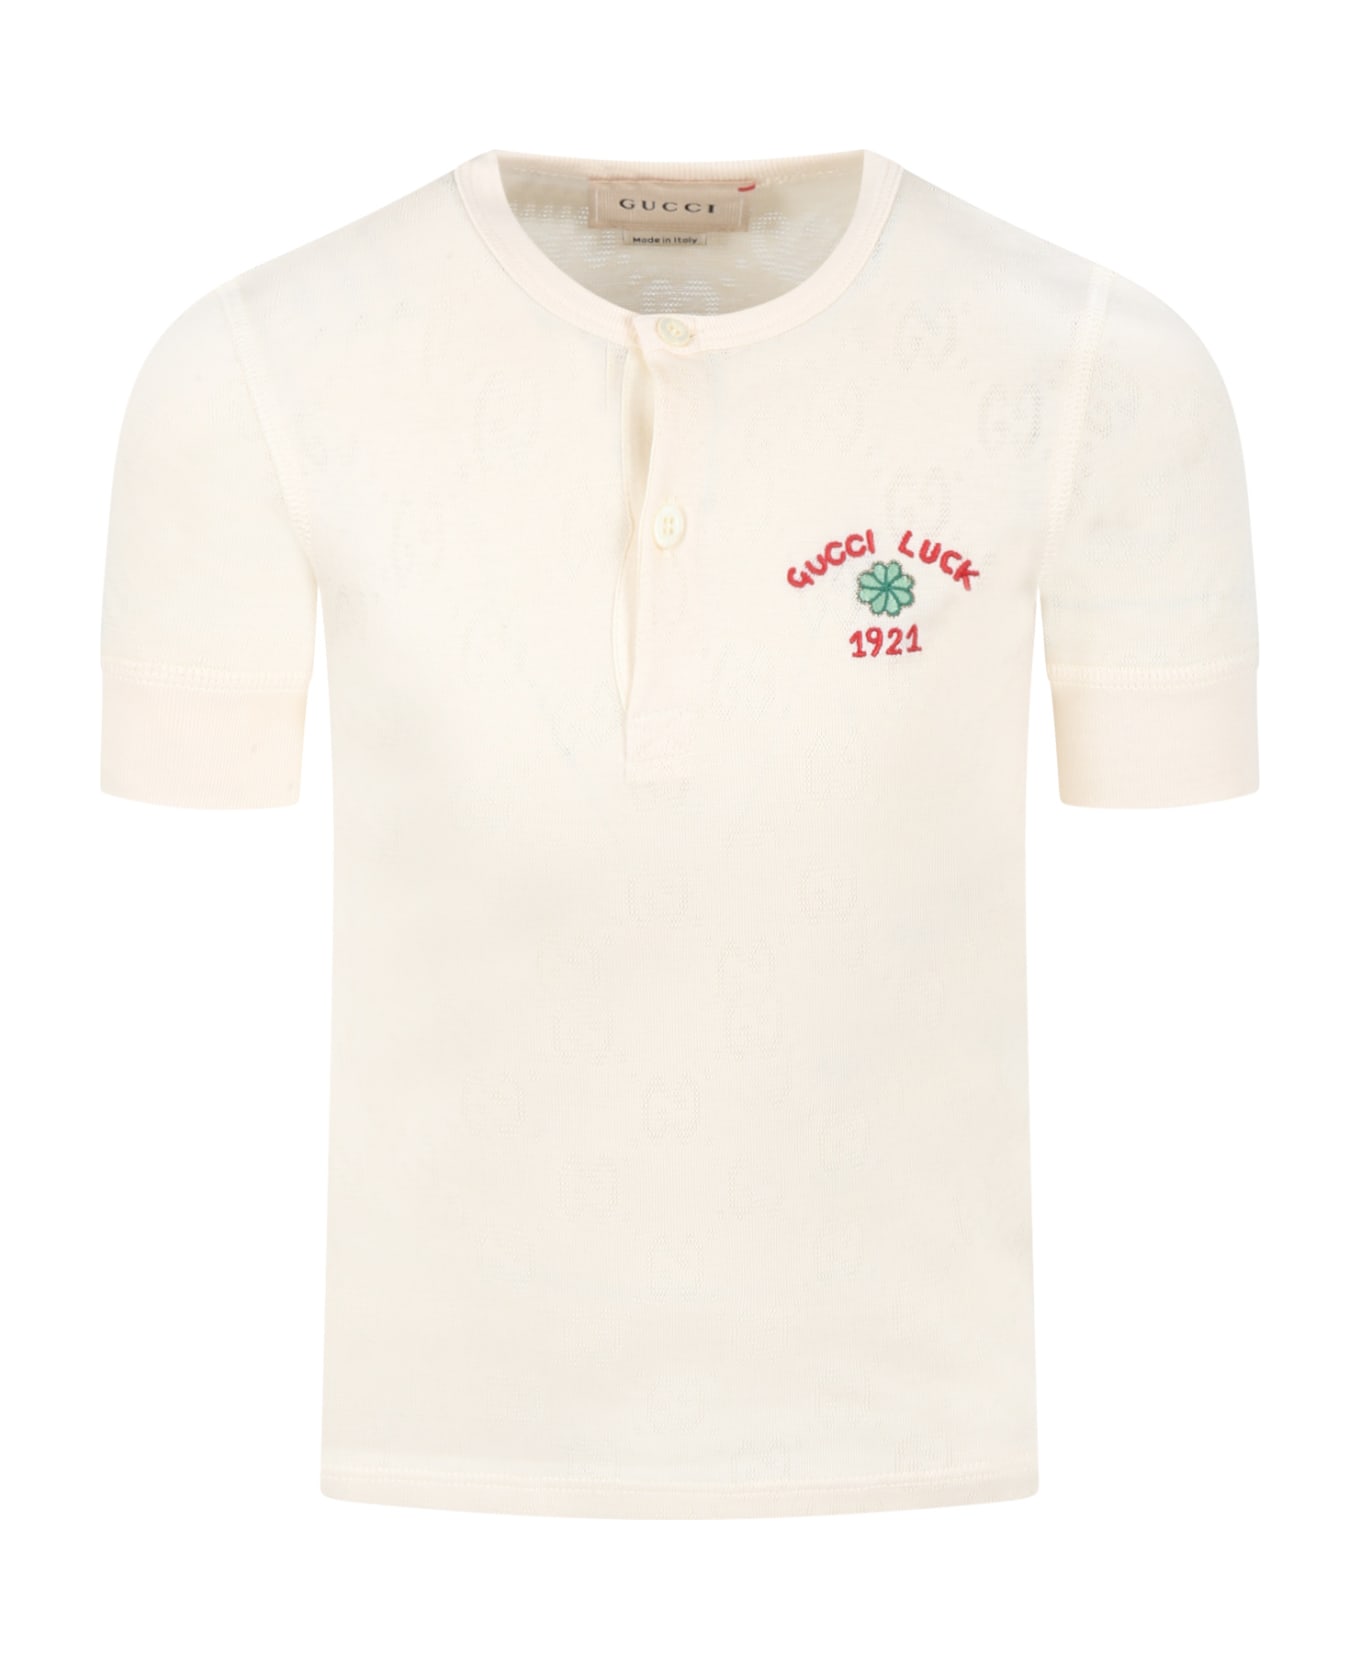 Gucci Ivory T-shirt For Kids With Gg Motif - Ivory